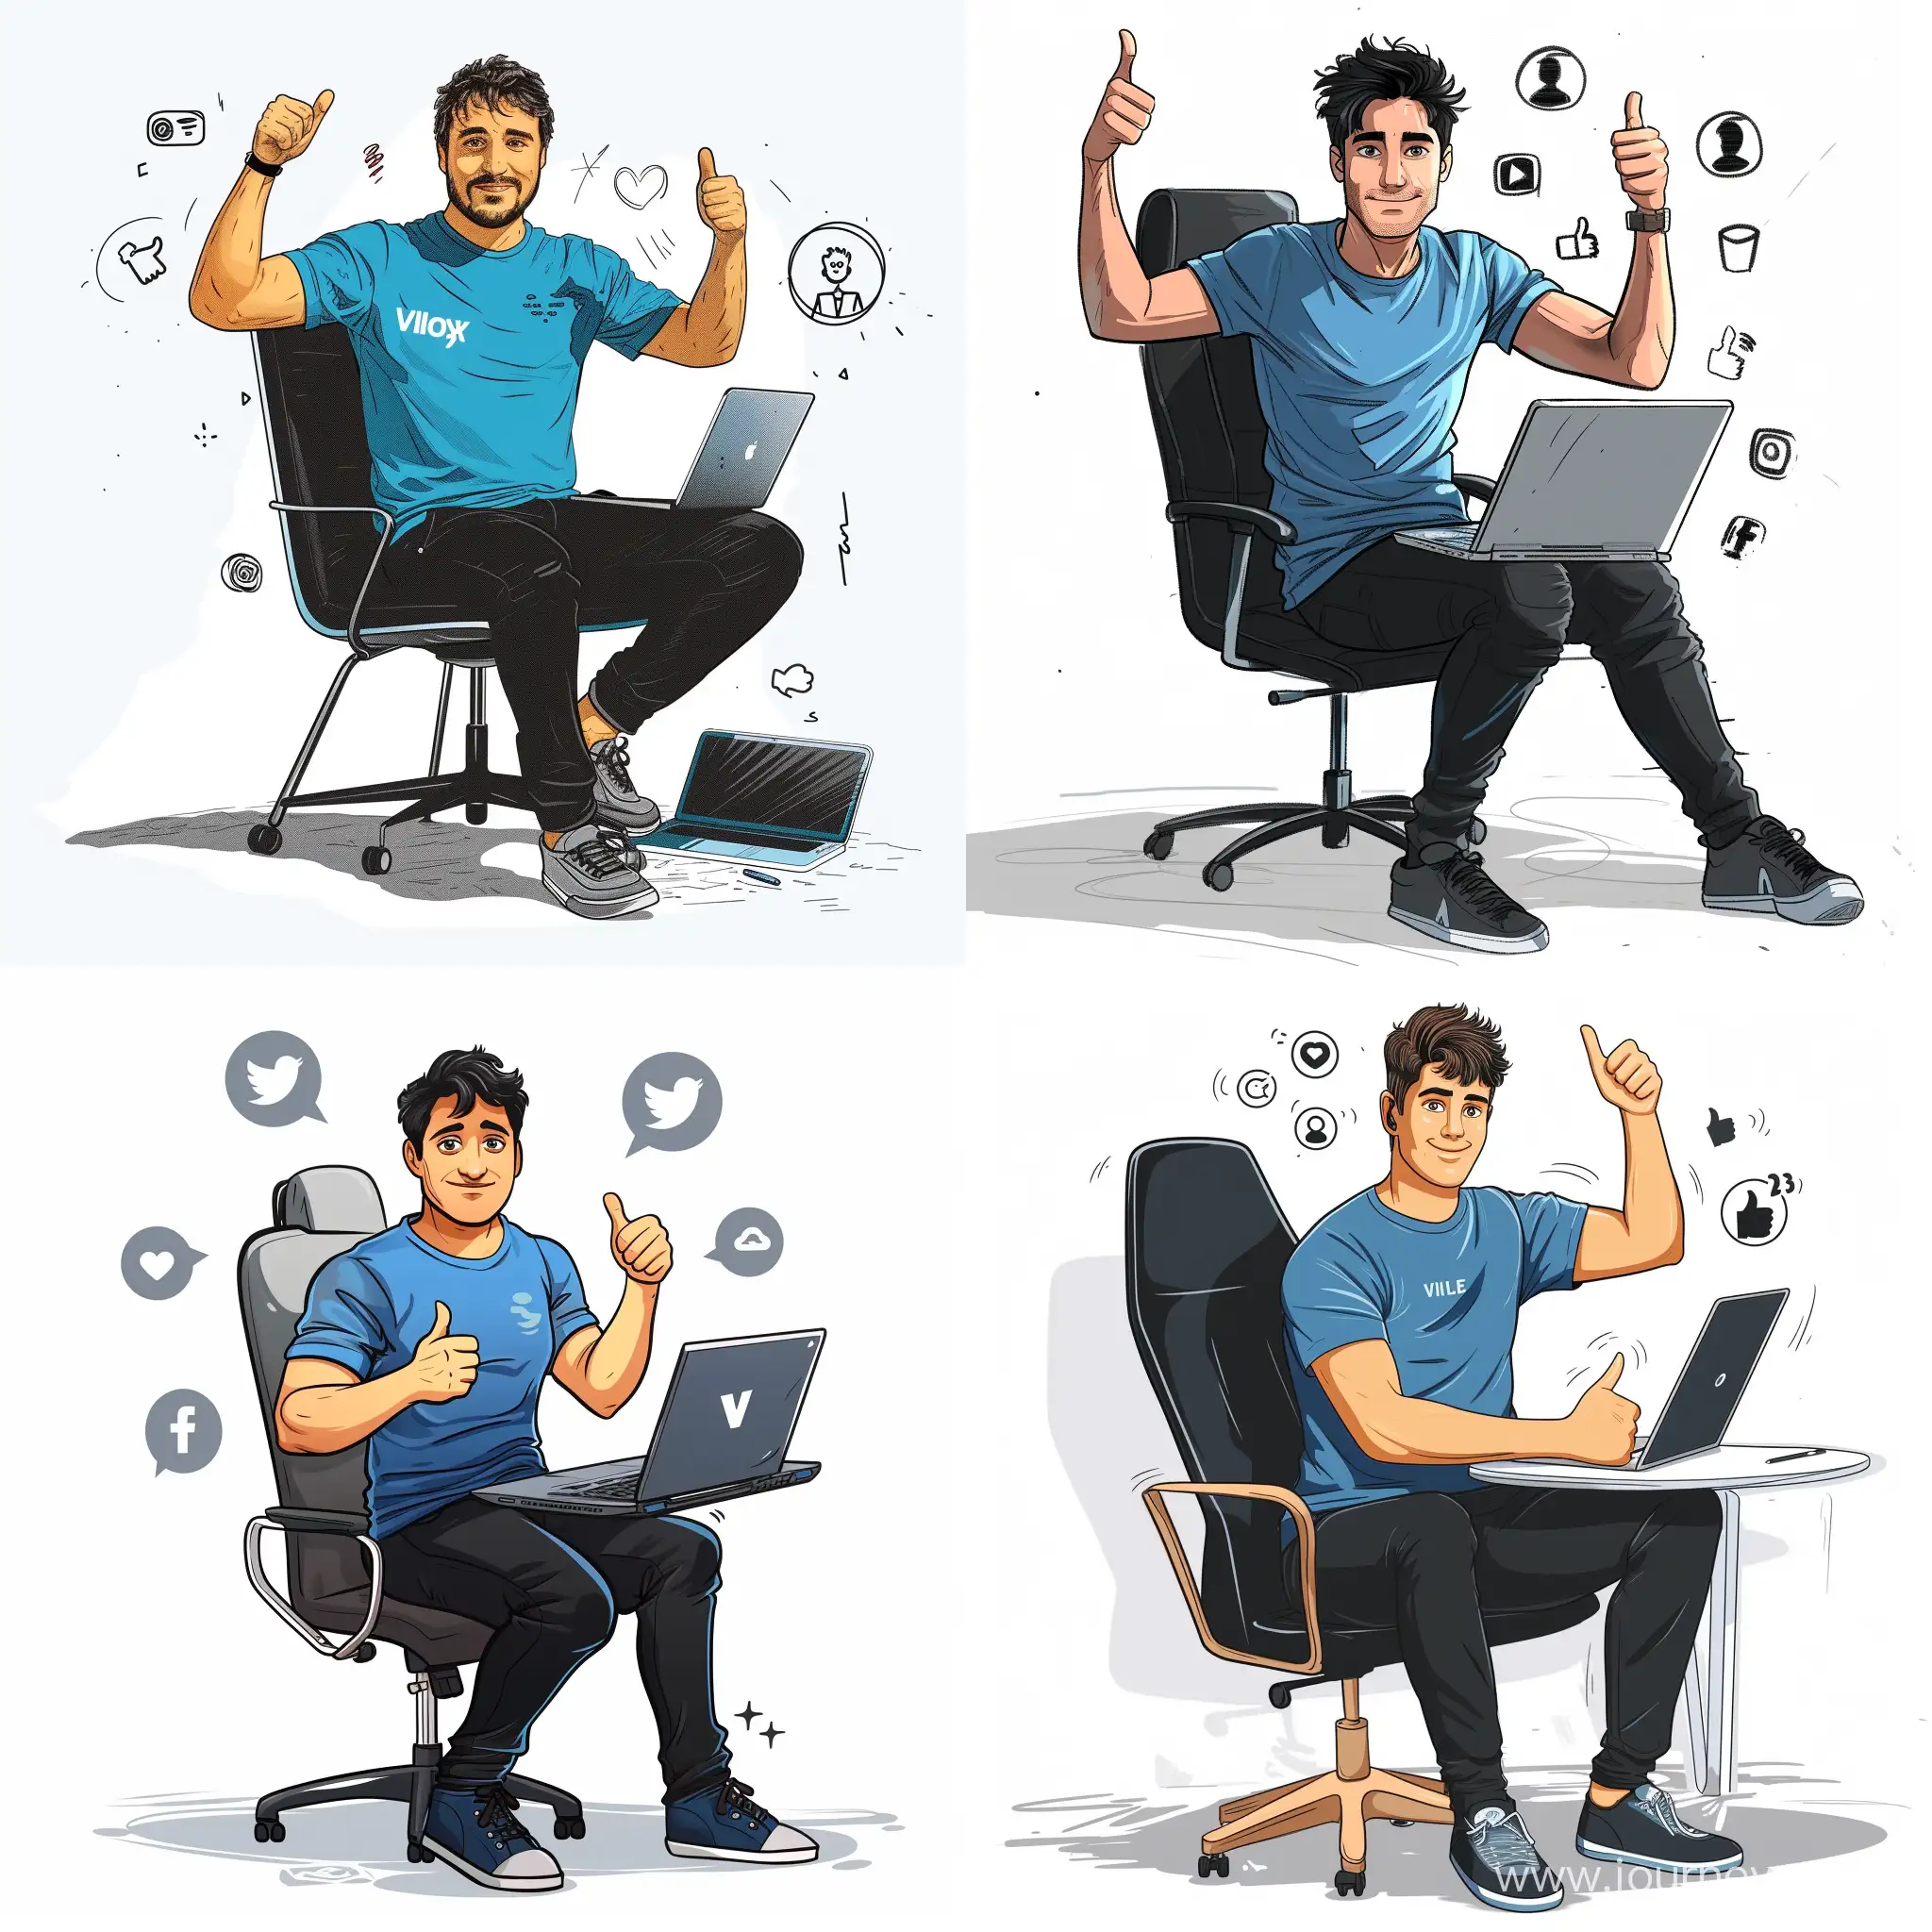 A 25-year-old man wearing a blue T-shirt and black pants is sitting on a chair and in front of a laptop.  He appears to be a programmer, waving with a thumbs up looking at the camera and there are social media icons around. Victor sketch drawing illustrator style on white background.